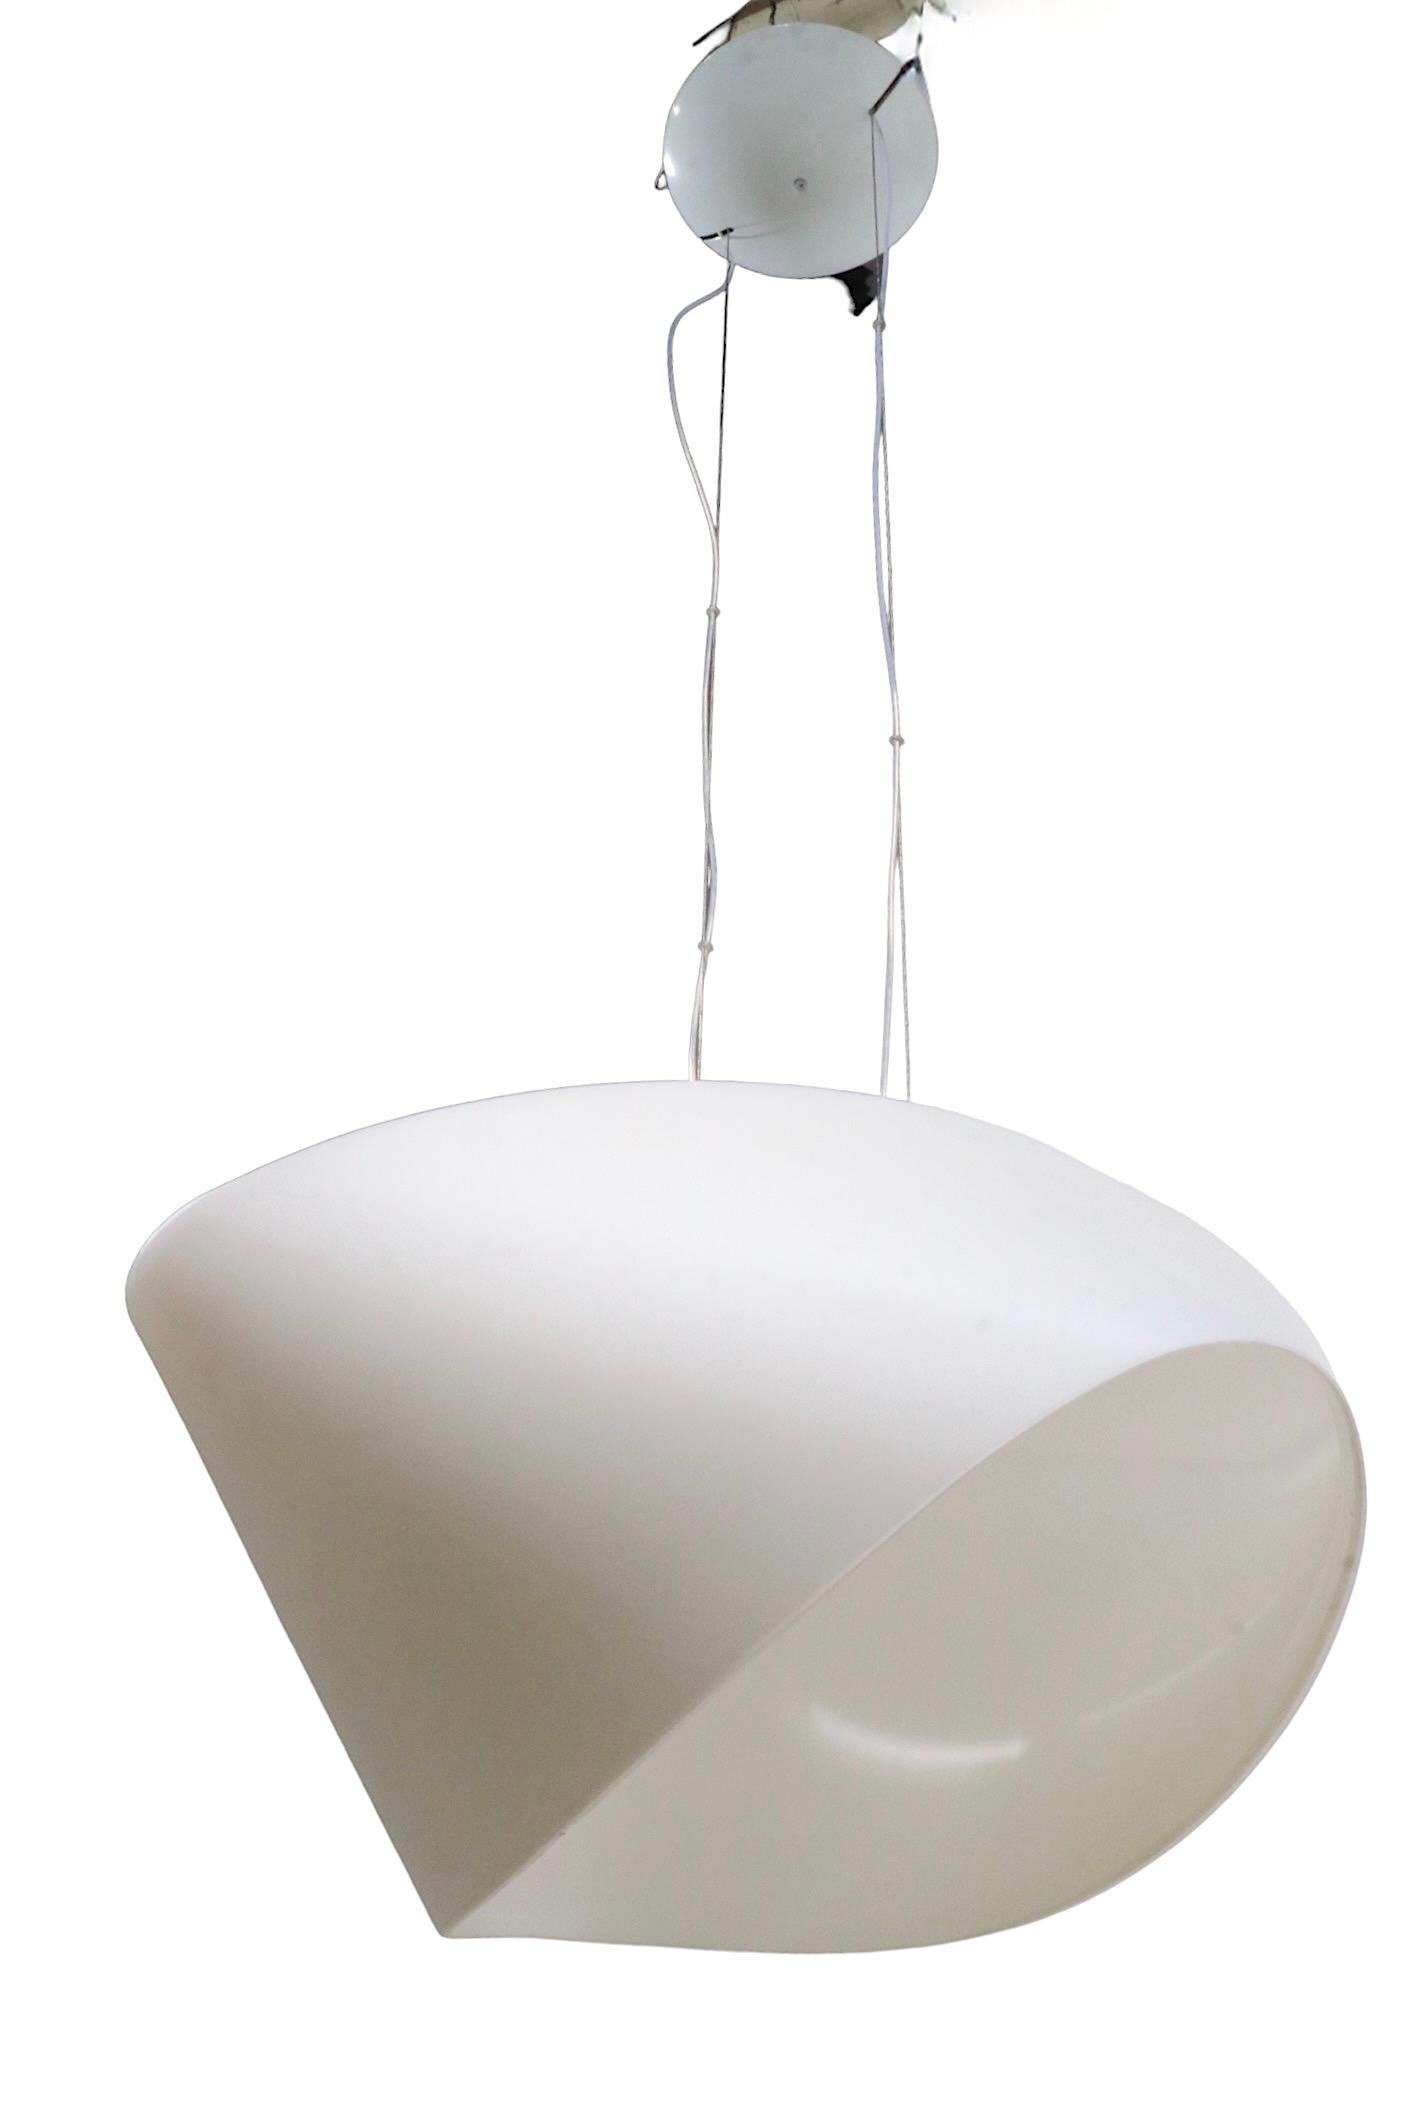 Asymmetrical Satin Glass Post Modern Light Fixture Made in Italy by Foscarini For Sale 8